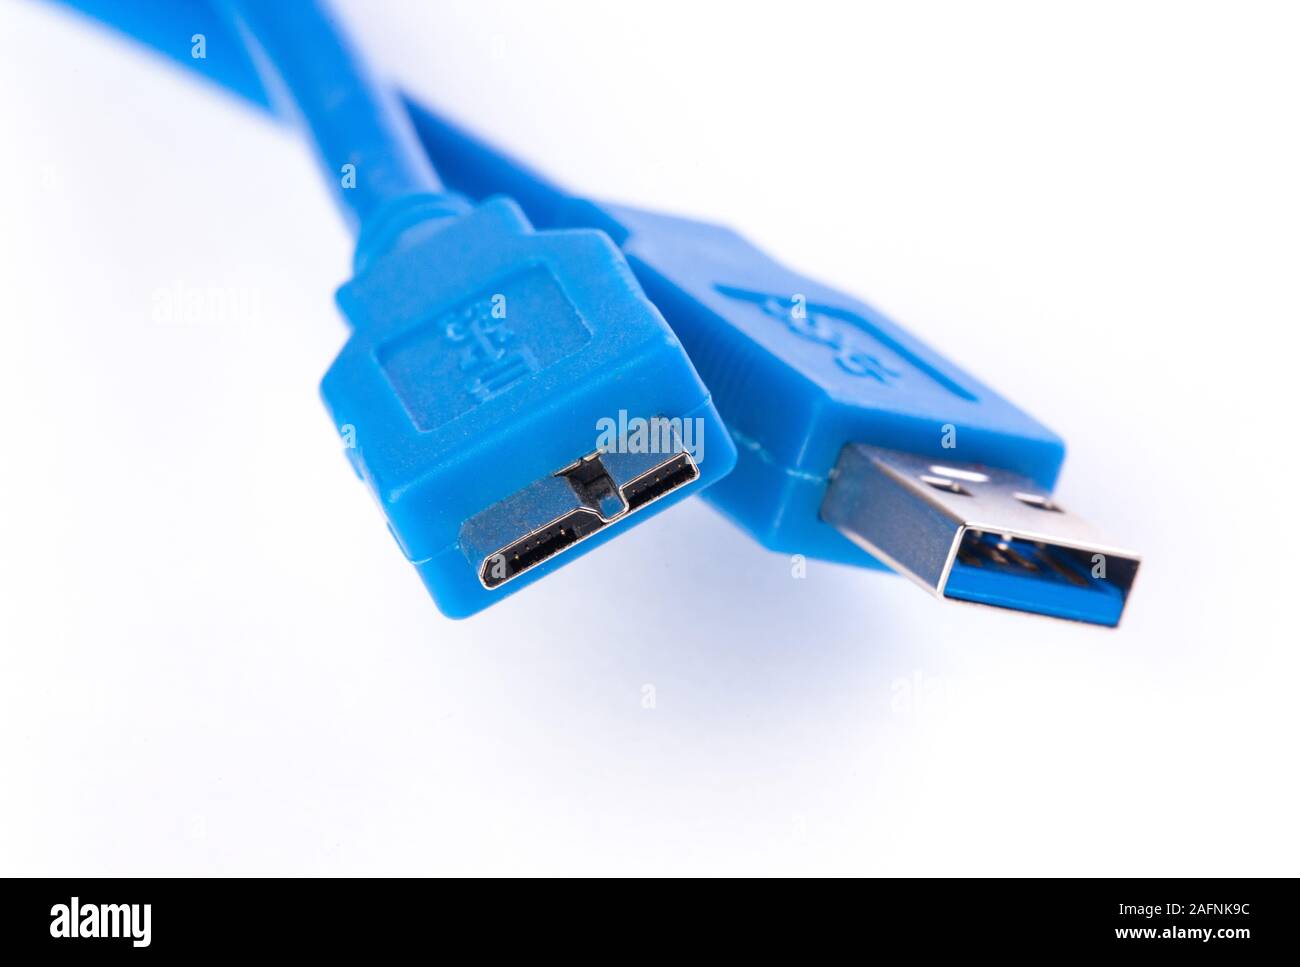 USB 3.0 cable & connectors Stock Photo